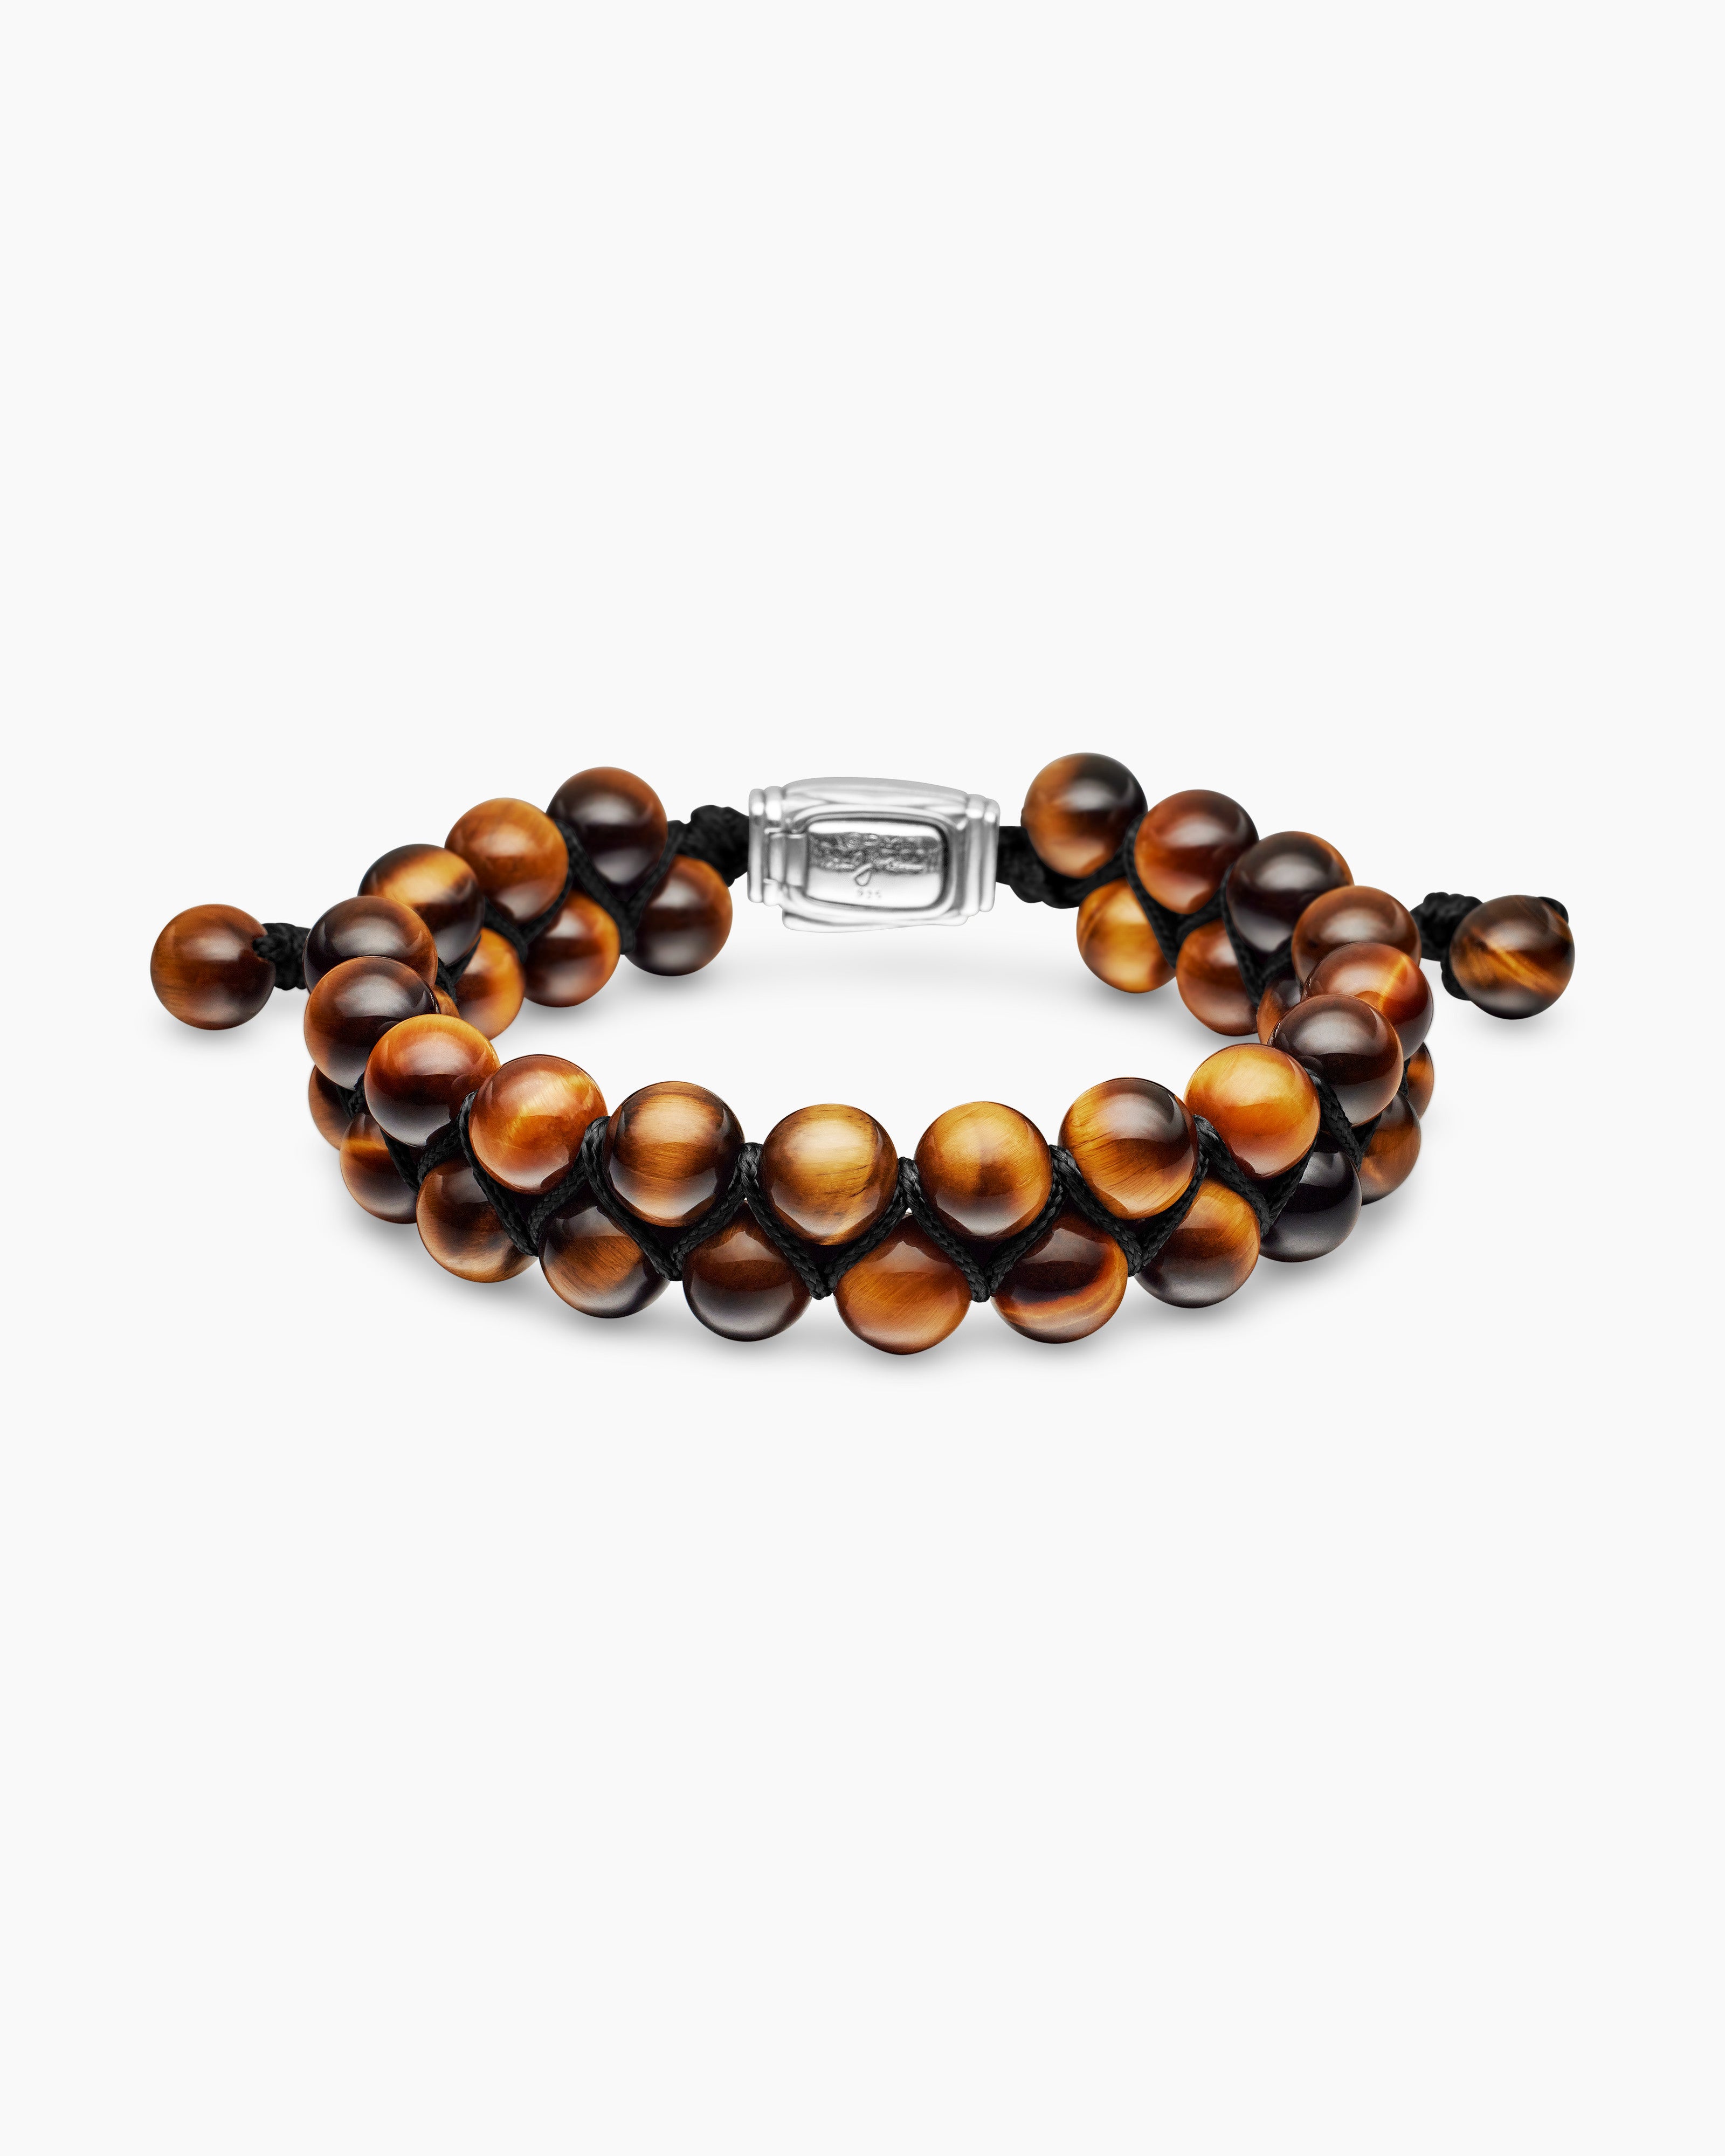 Tiger Eye Necklace 8mm Tiger's Eye Beads Hand Knotted Brown Tigers Eye Beads